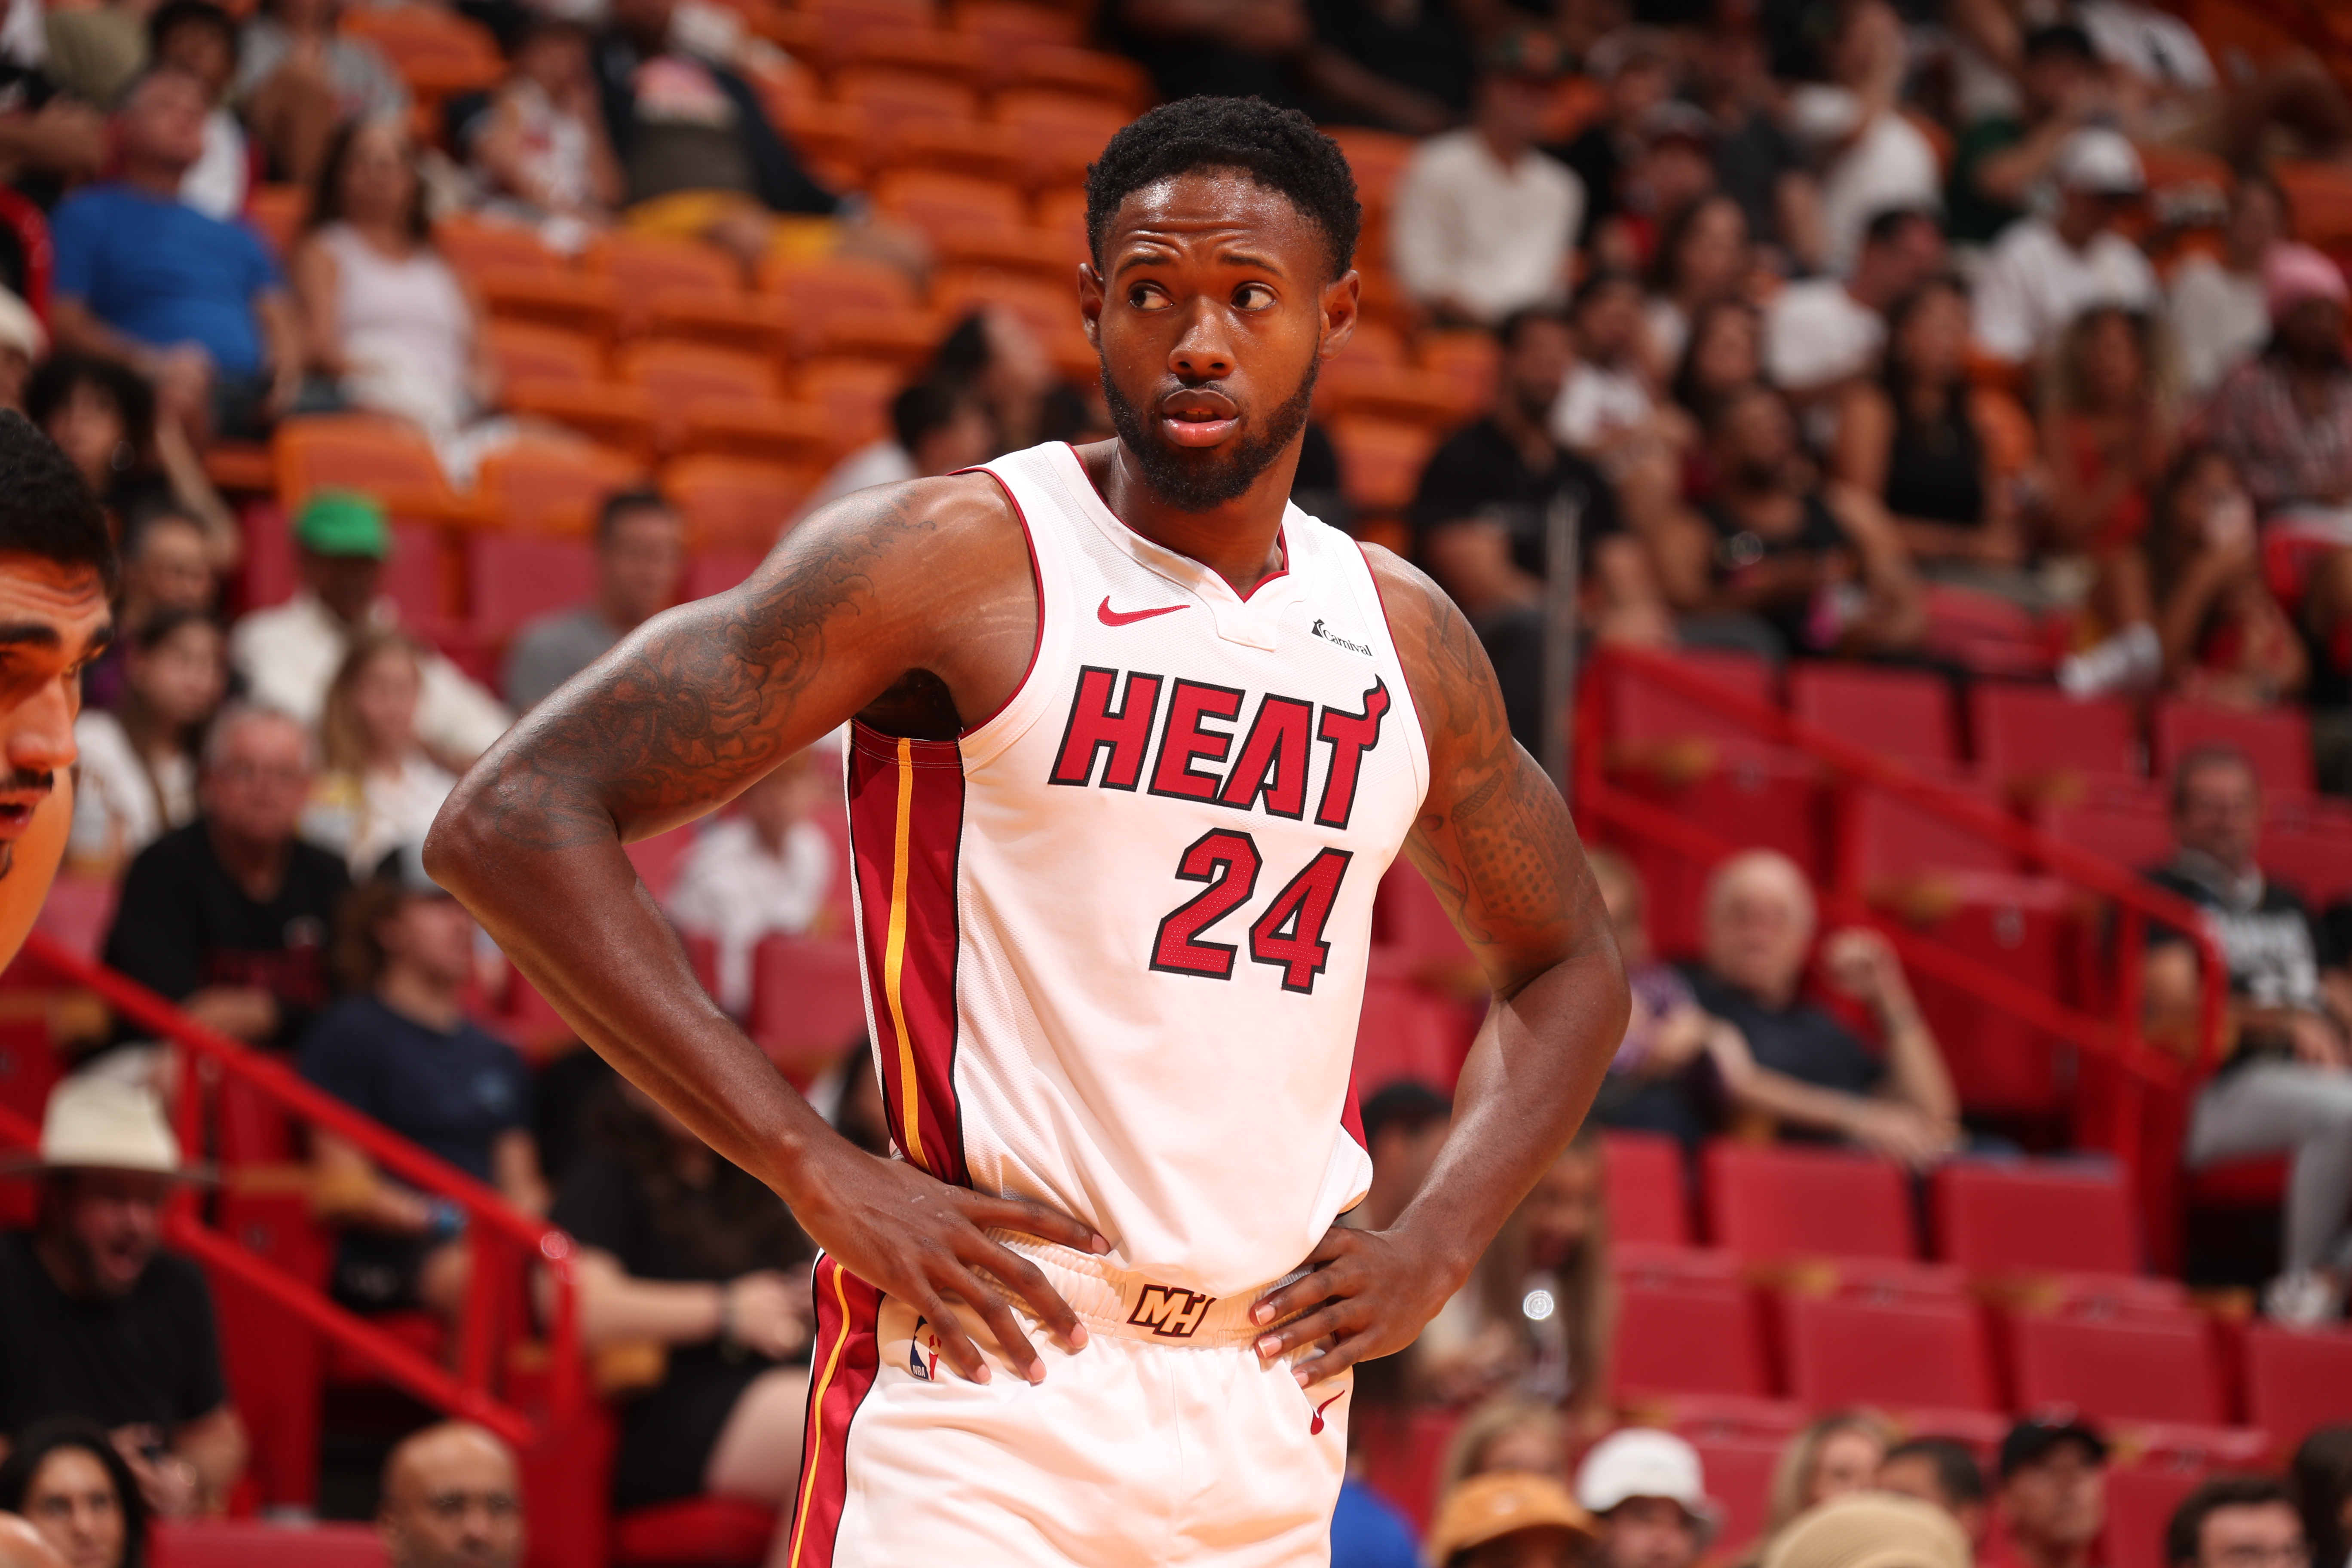 3 Reasons Why The Miami Heat's Big 3 Would Still Dominate Today